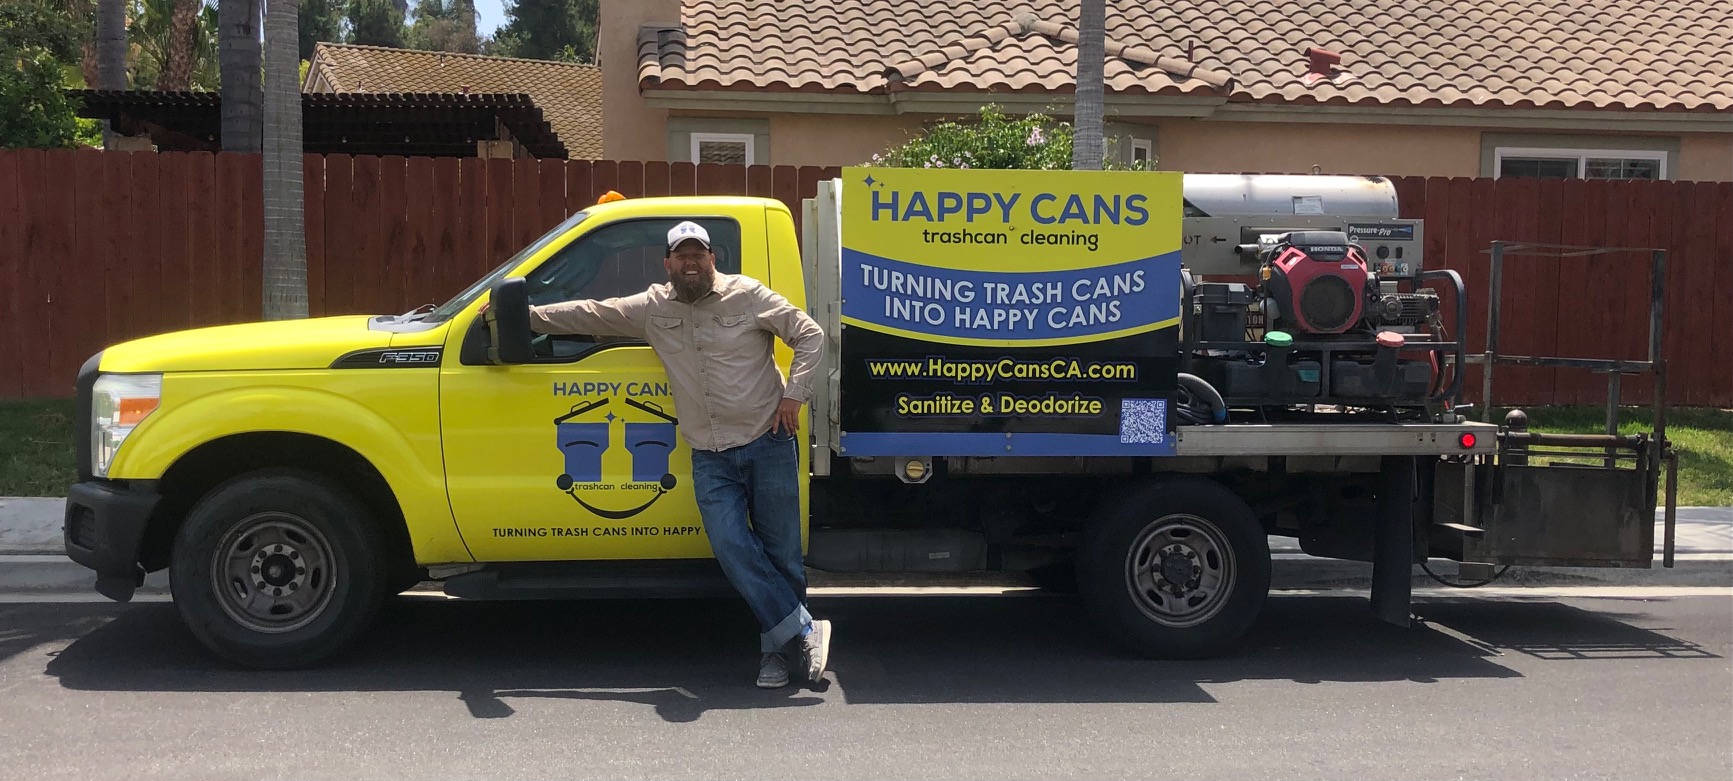 Happy Cans Truck - turning trashcans into Happy Cans